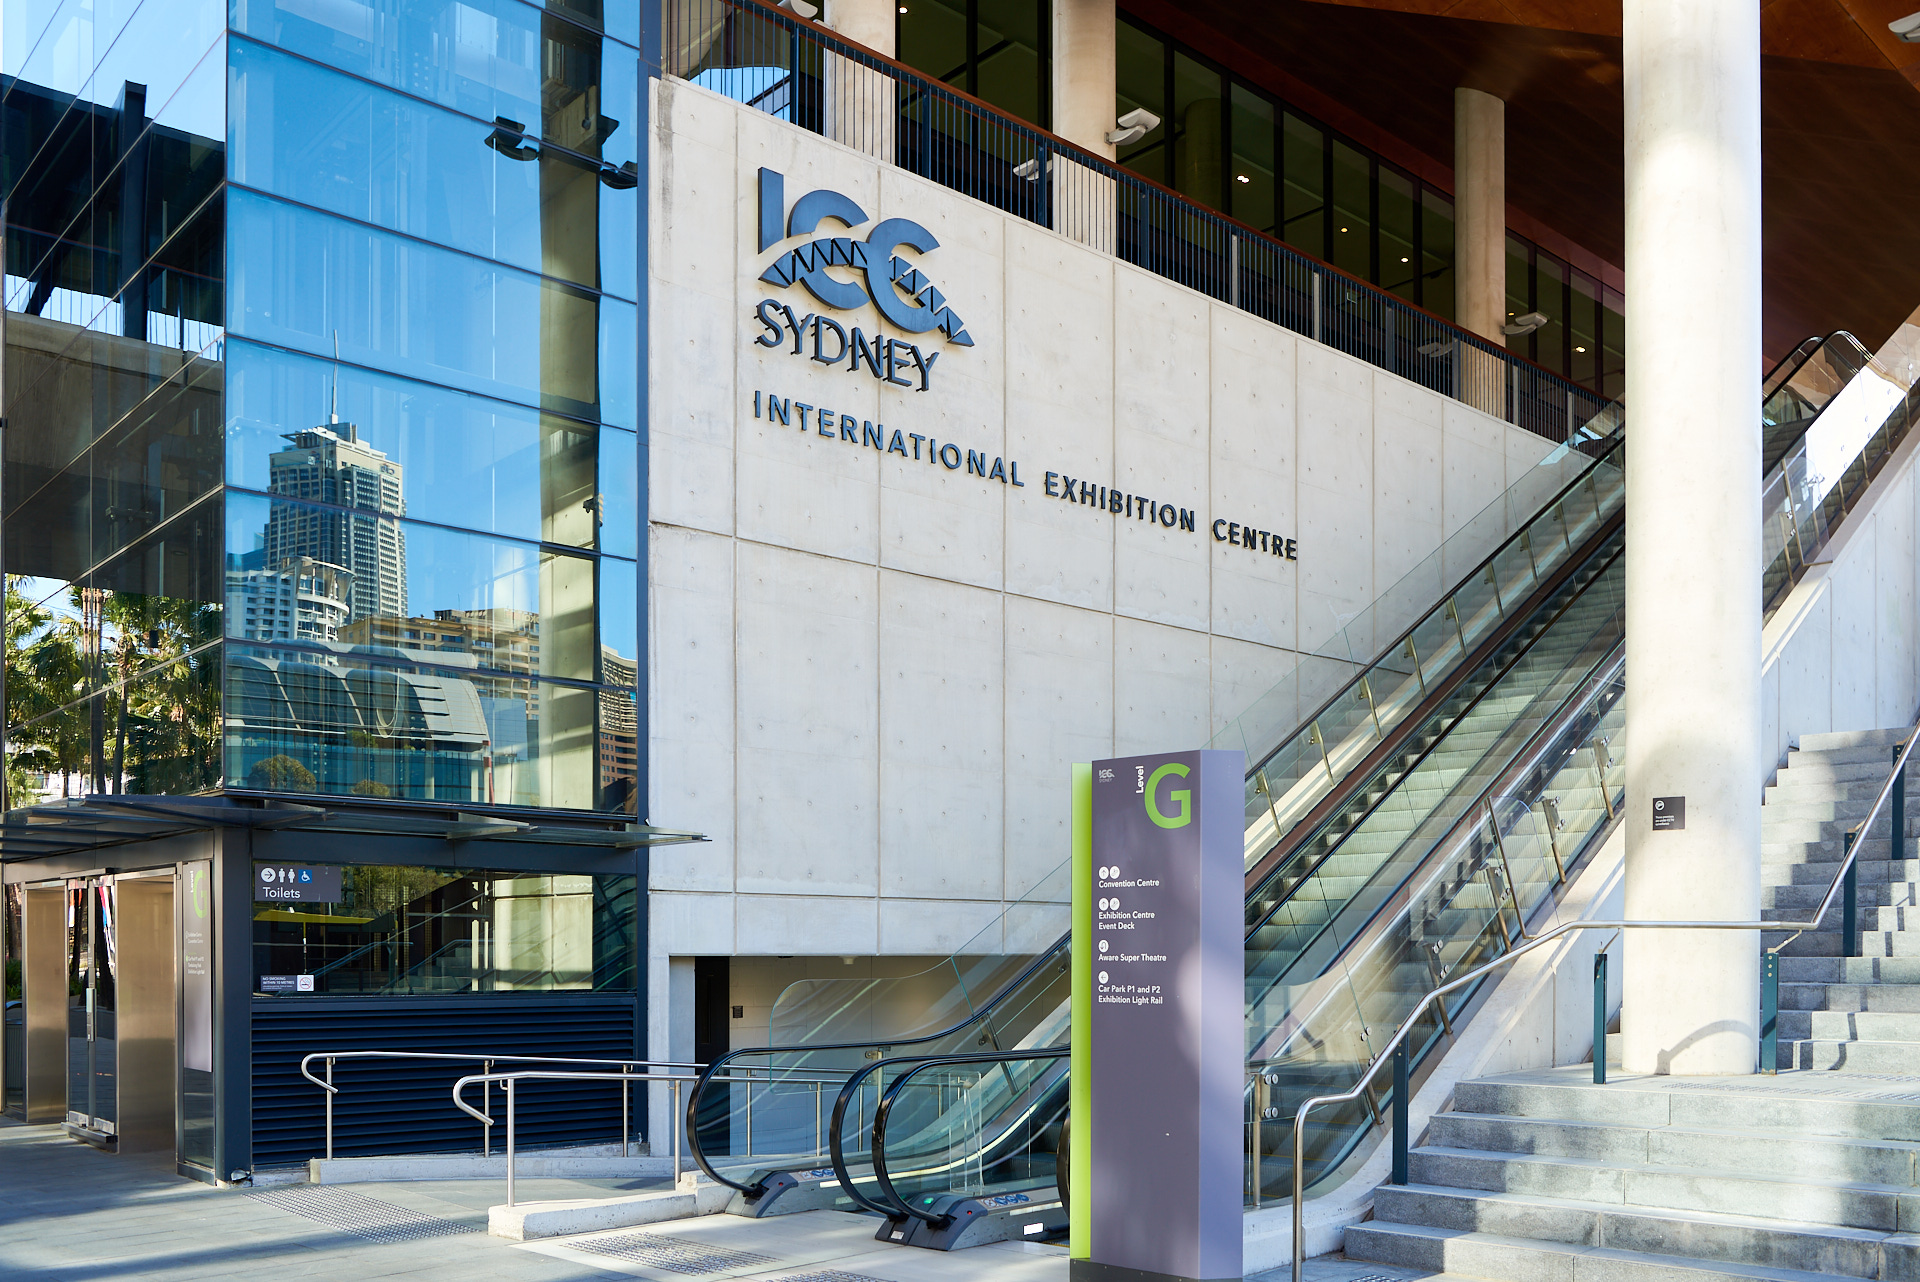 Entrance Photo to Sydney International Exhibition Centre, Trade Show Halls, Stairs to South Entrance, Darling Harbour.